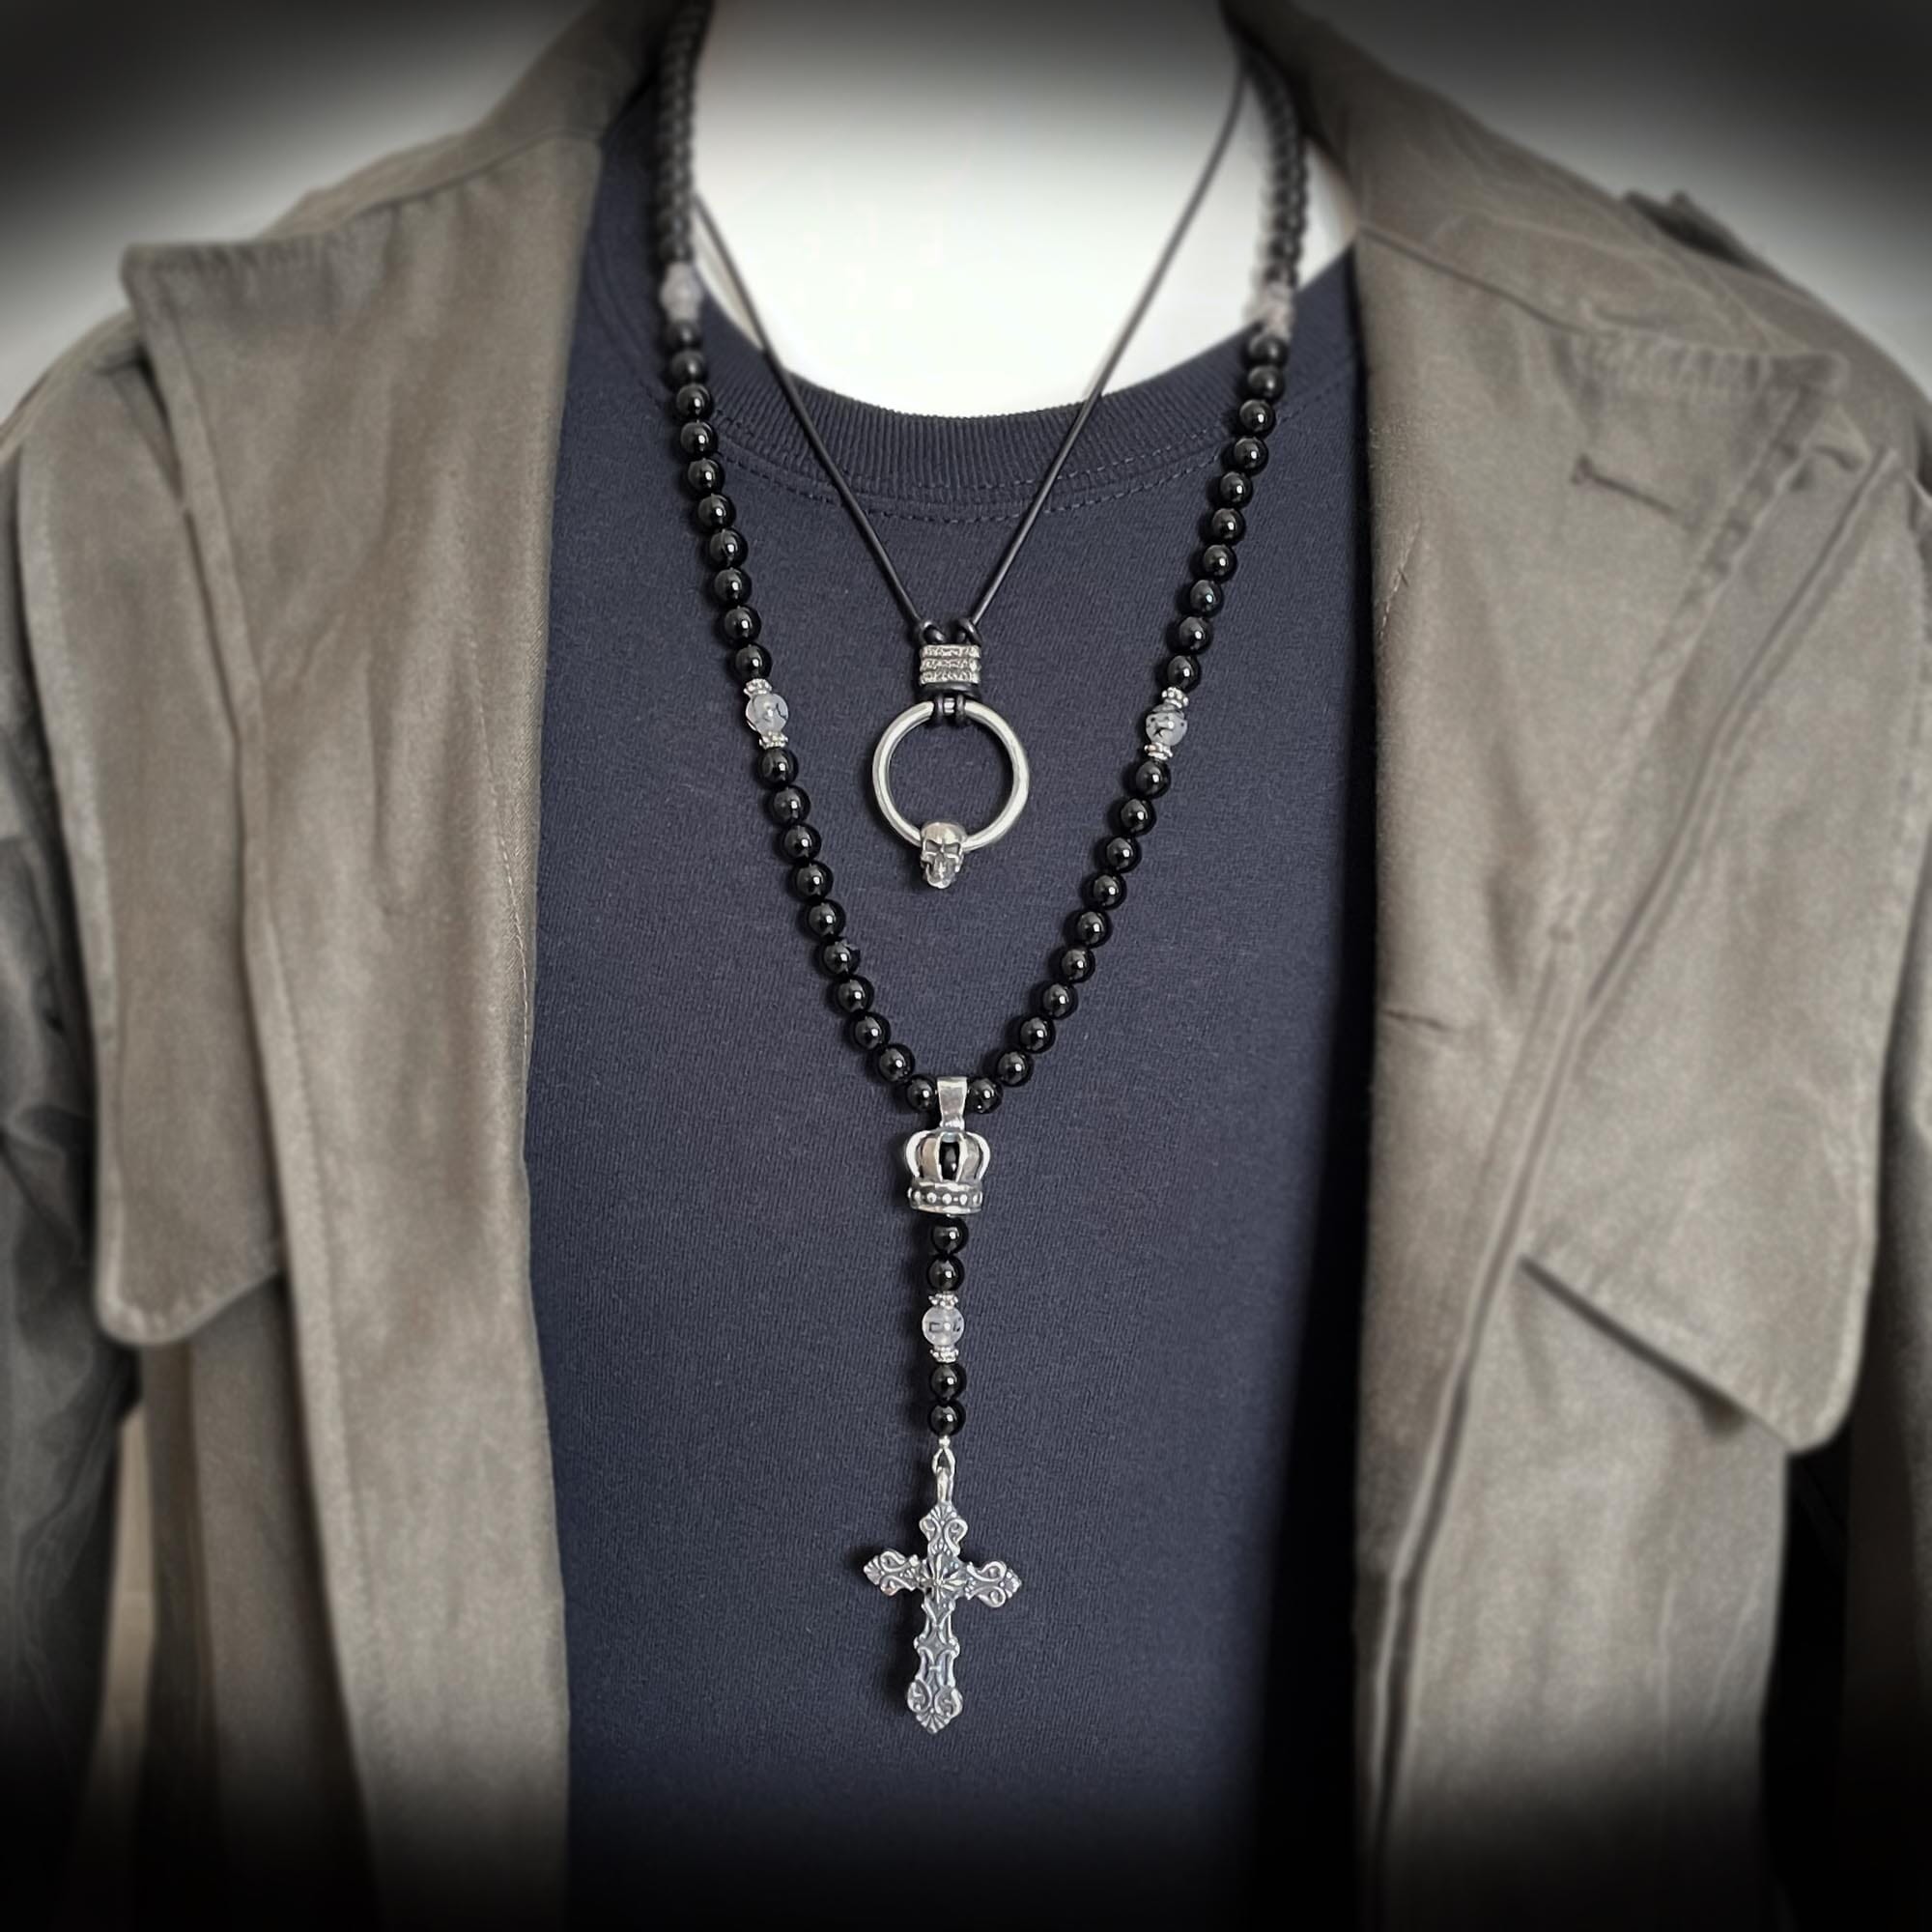 Rock n Roll Jewelry, Rosary Necklace by Rock my Wings